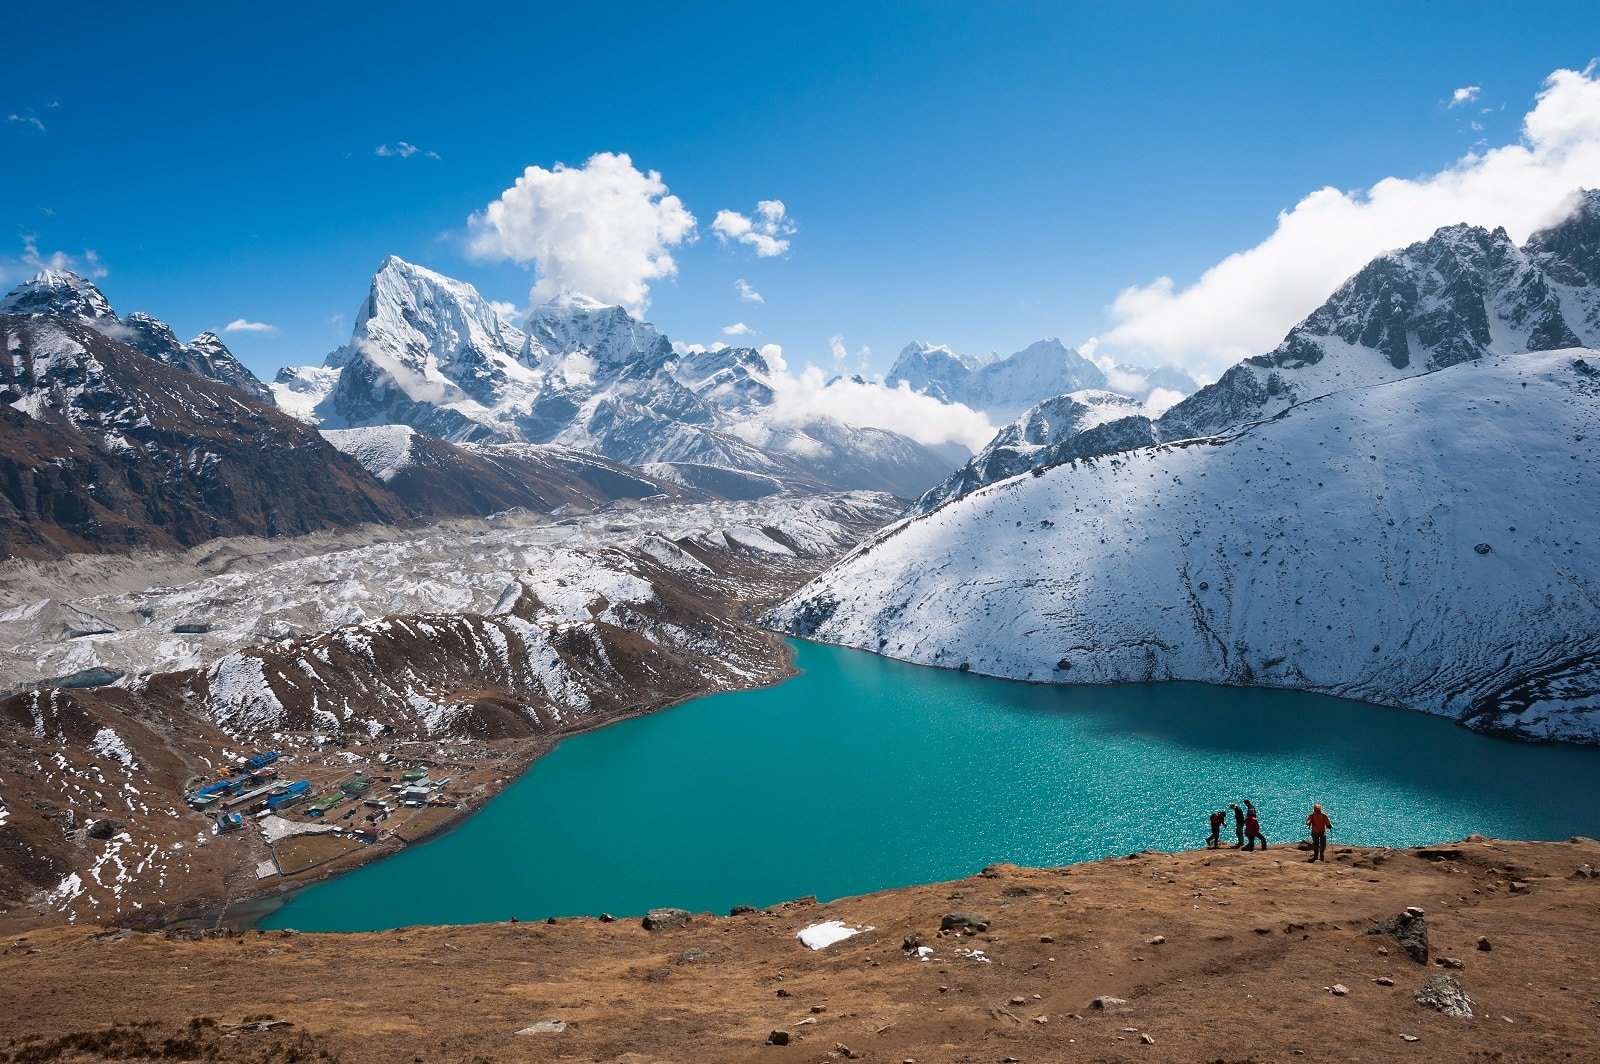 <p><span>The Gokyo Lakes trek is a fantastic alternative to the Everest Base Camp trek, taking you to a series of stunning high-altitude lakes in the Gokyo Valley. The trek is less crowded and provides spectacular views of Everest and surrounding mountains. Climbing Gokyo Ri offers one of the best viewpoints in the Everest region. The trek passes through Sherpa villages, offering insight into the local culture.</span></p> <p><b>Insider’s Tip: </b><span>Trek during the full moon for spectacular night views of the mountains. </span></p> <p><b>When To Travel: </b><span>March to May and September to November for the best weather. </span></p> <p><b>How To Get There: </b><span>Similar to Everest Base Camp, fly to Lukla and follow a different trail.</span></p>